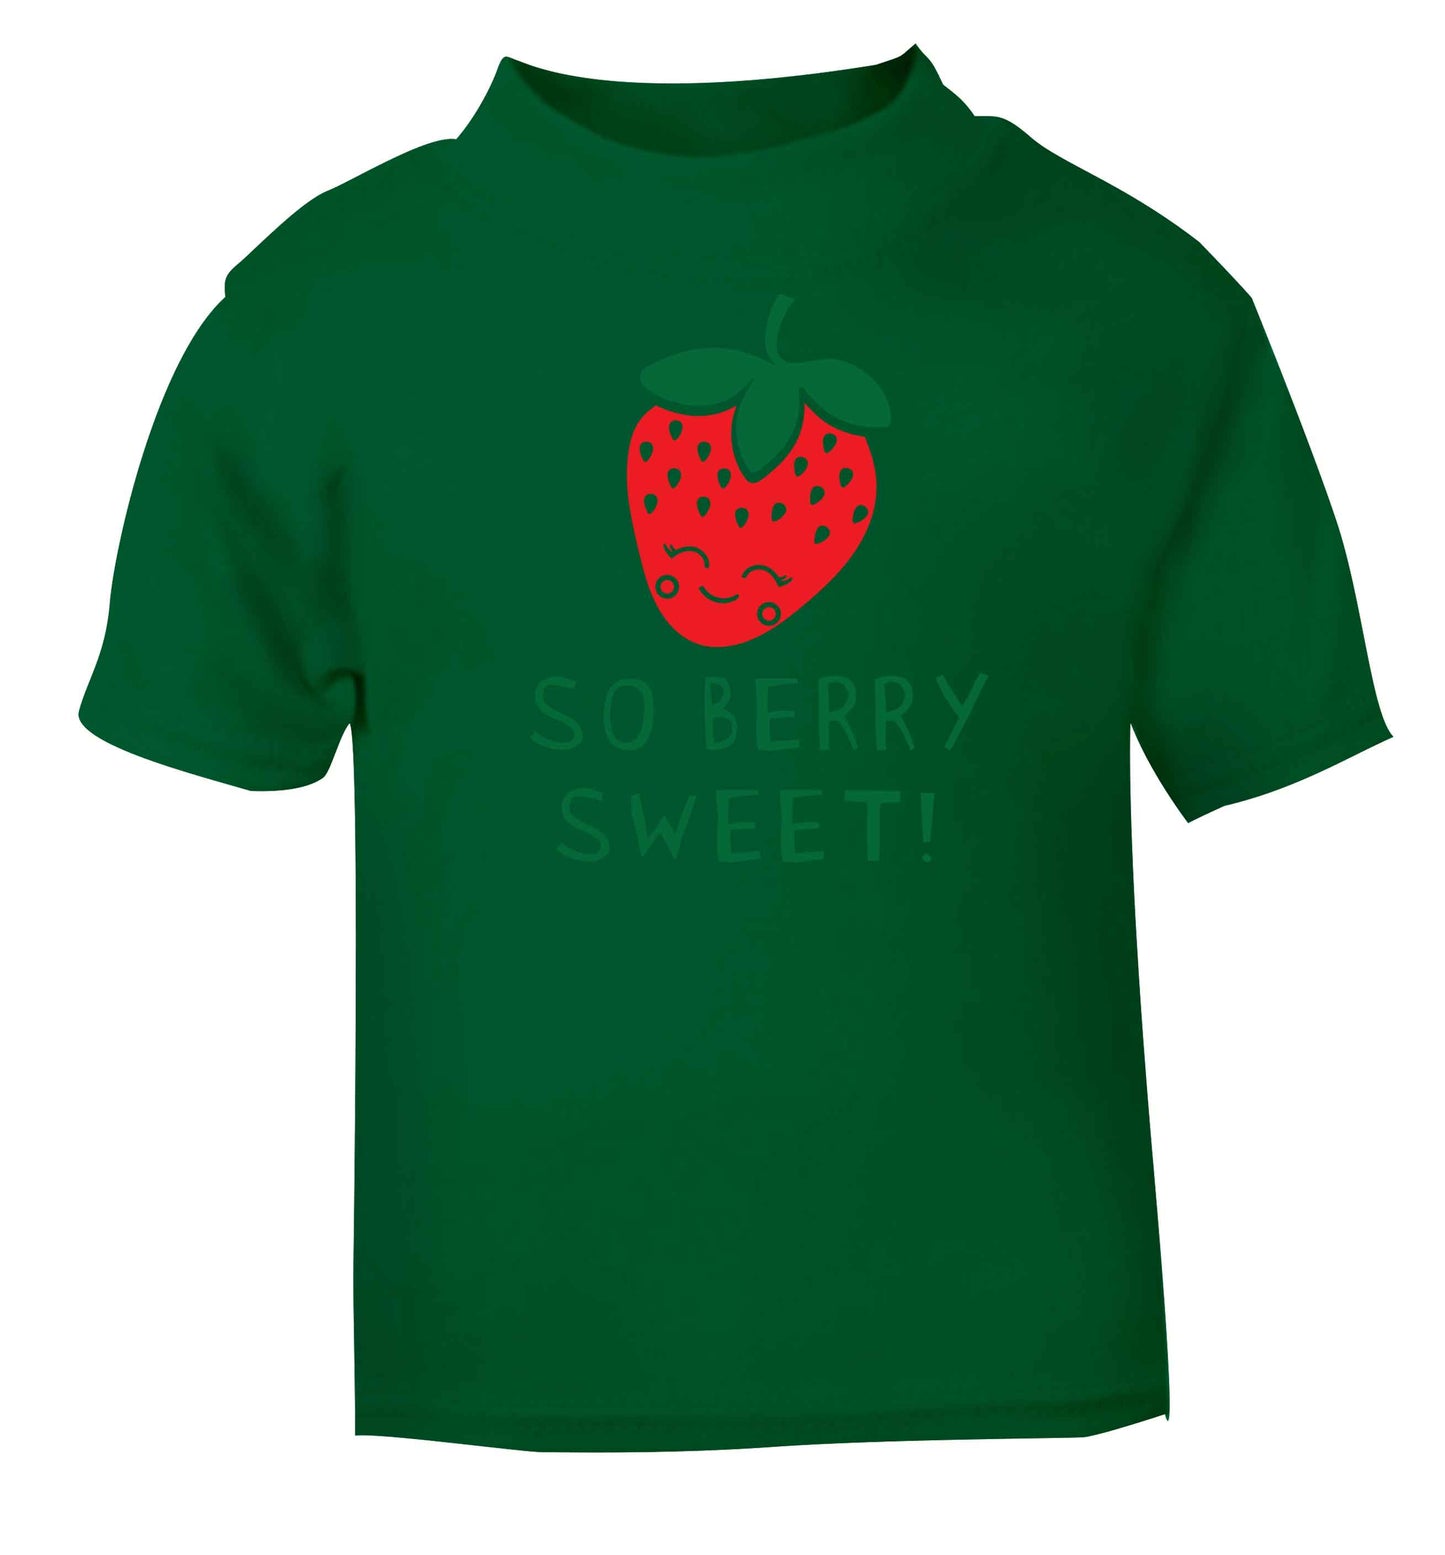 So berry sweet green baby toddler Tshirt 2 Years